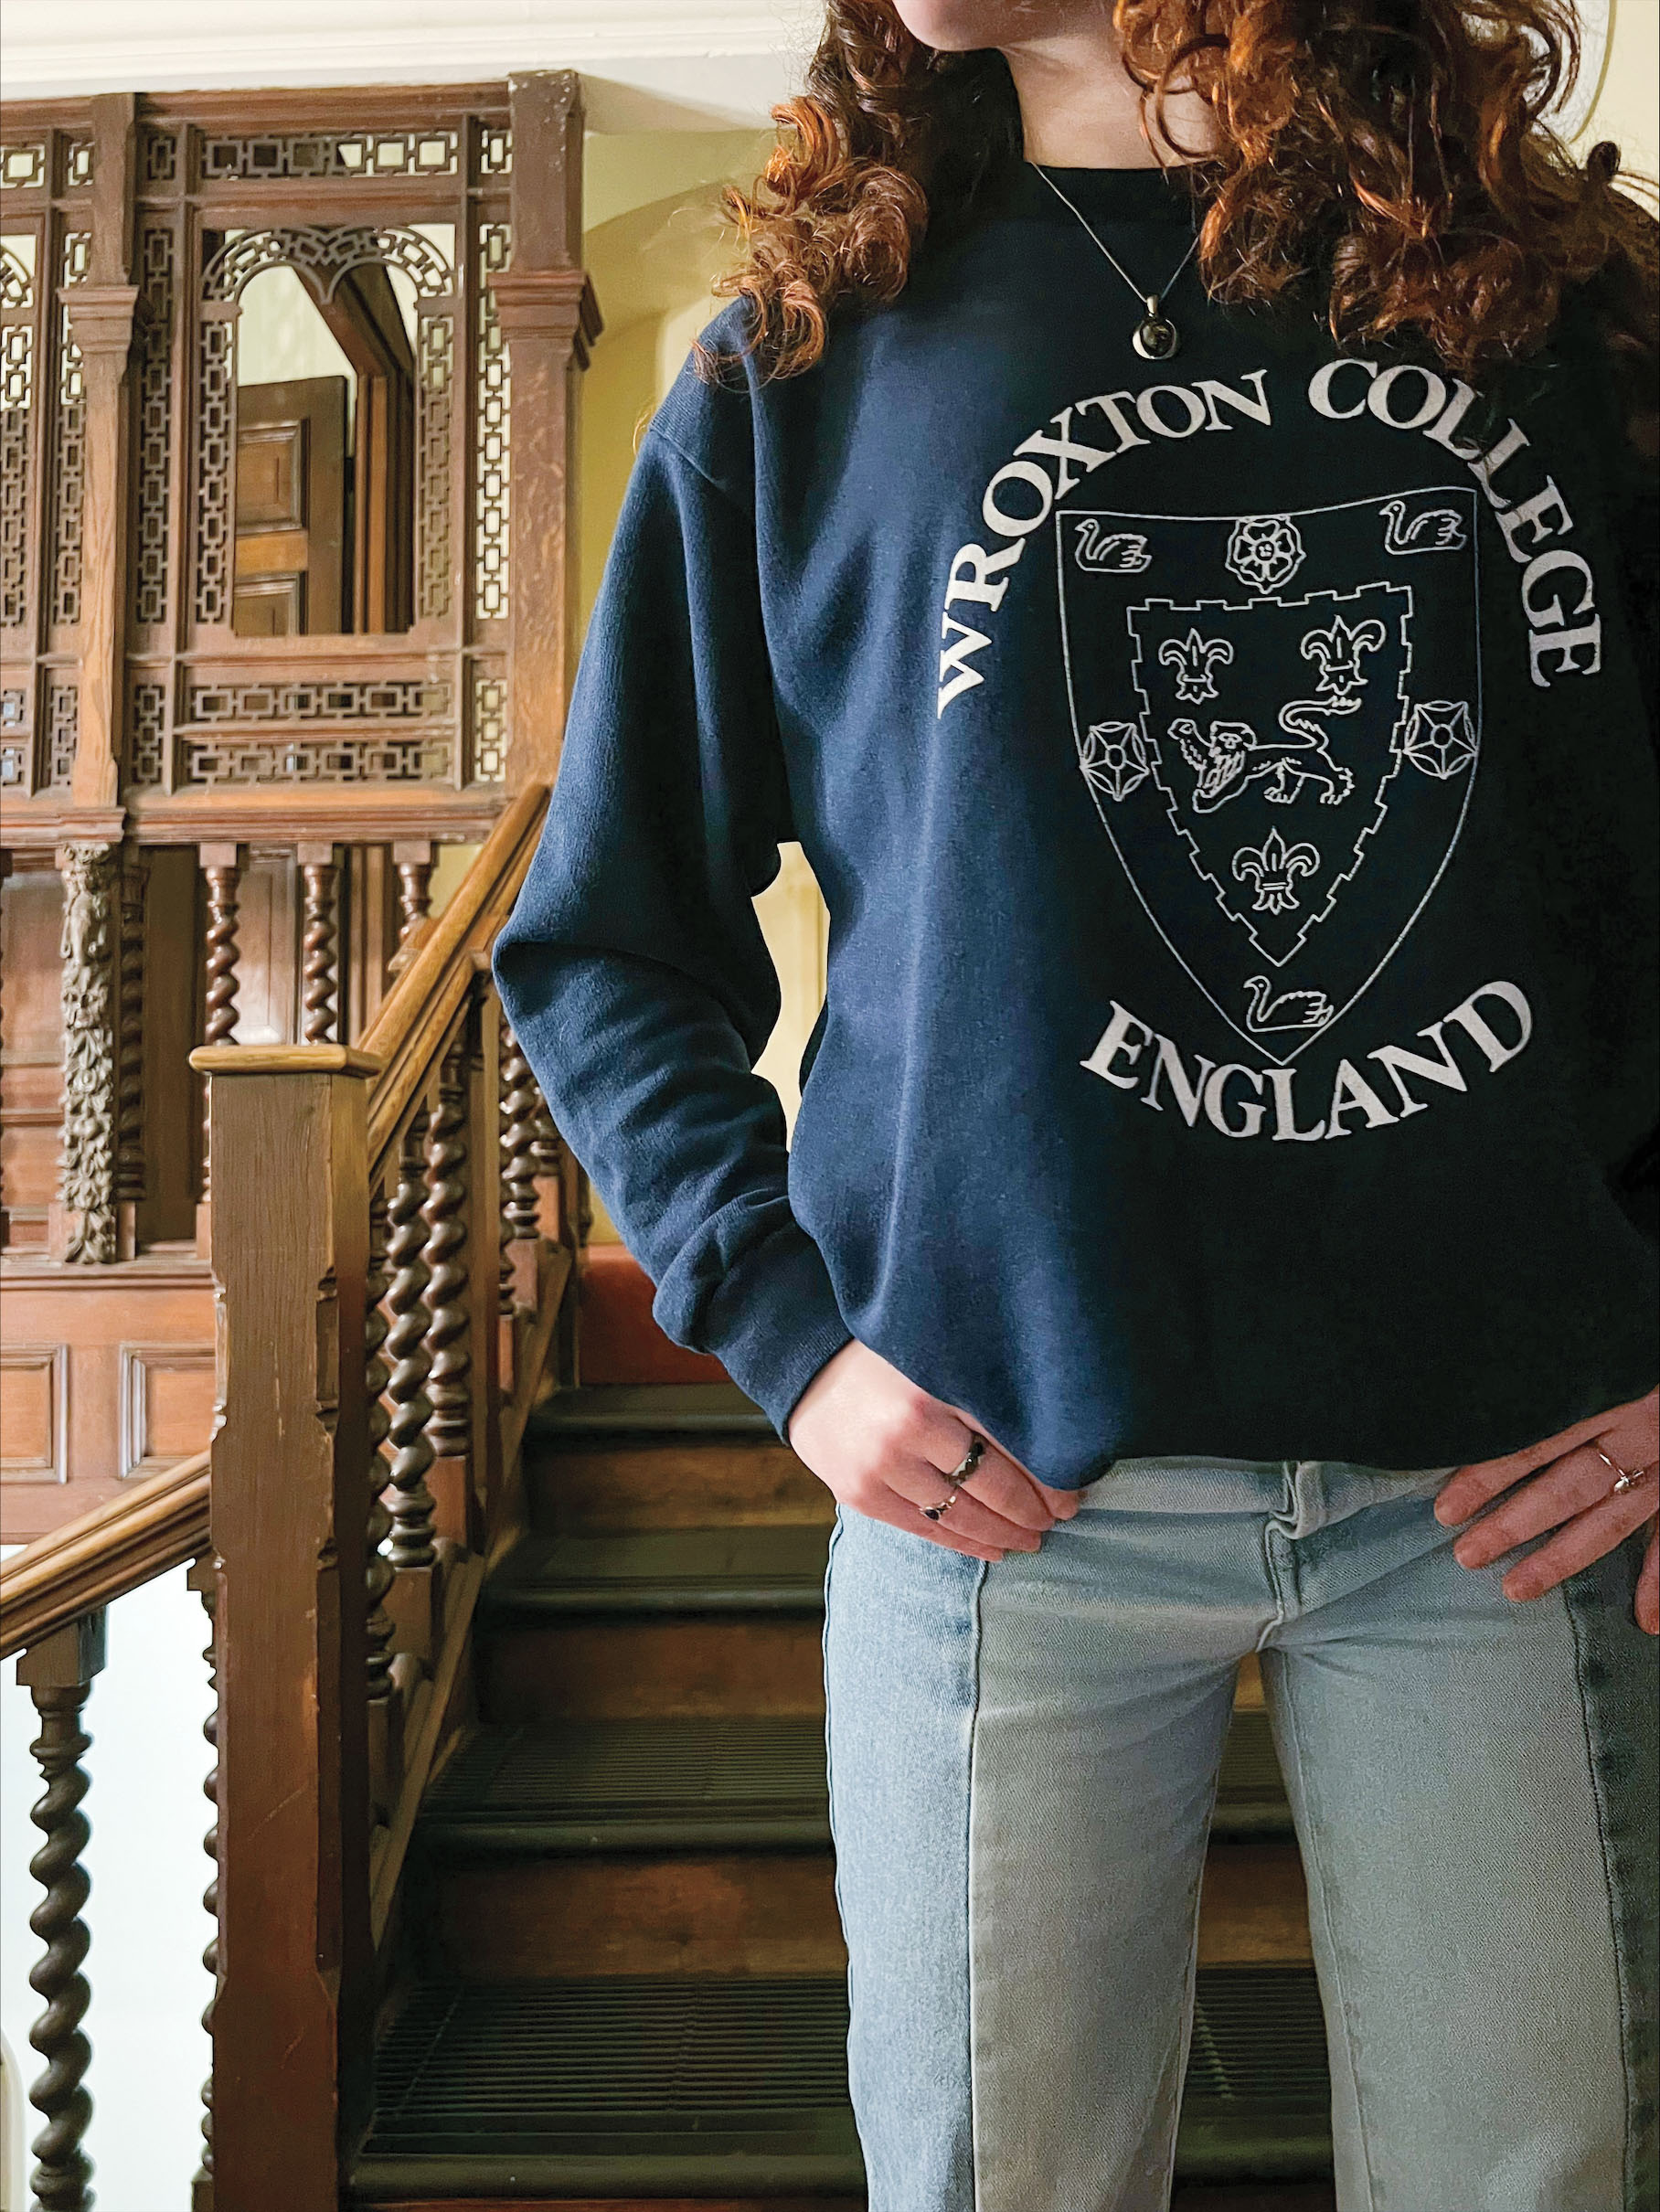 A close-up photo of a young woman wearing a vintage Wroxton College sweatshirt.